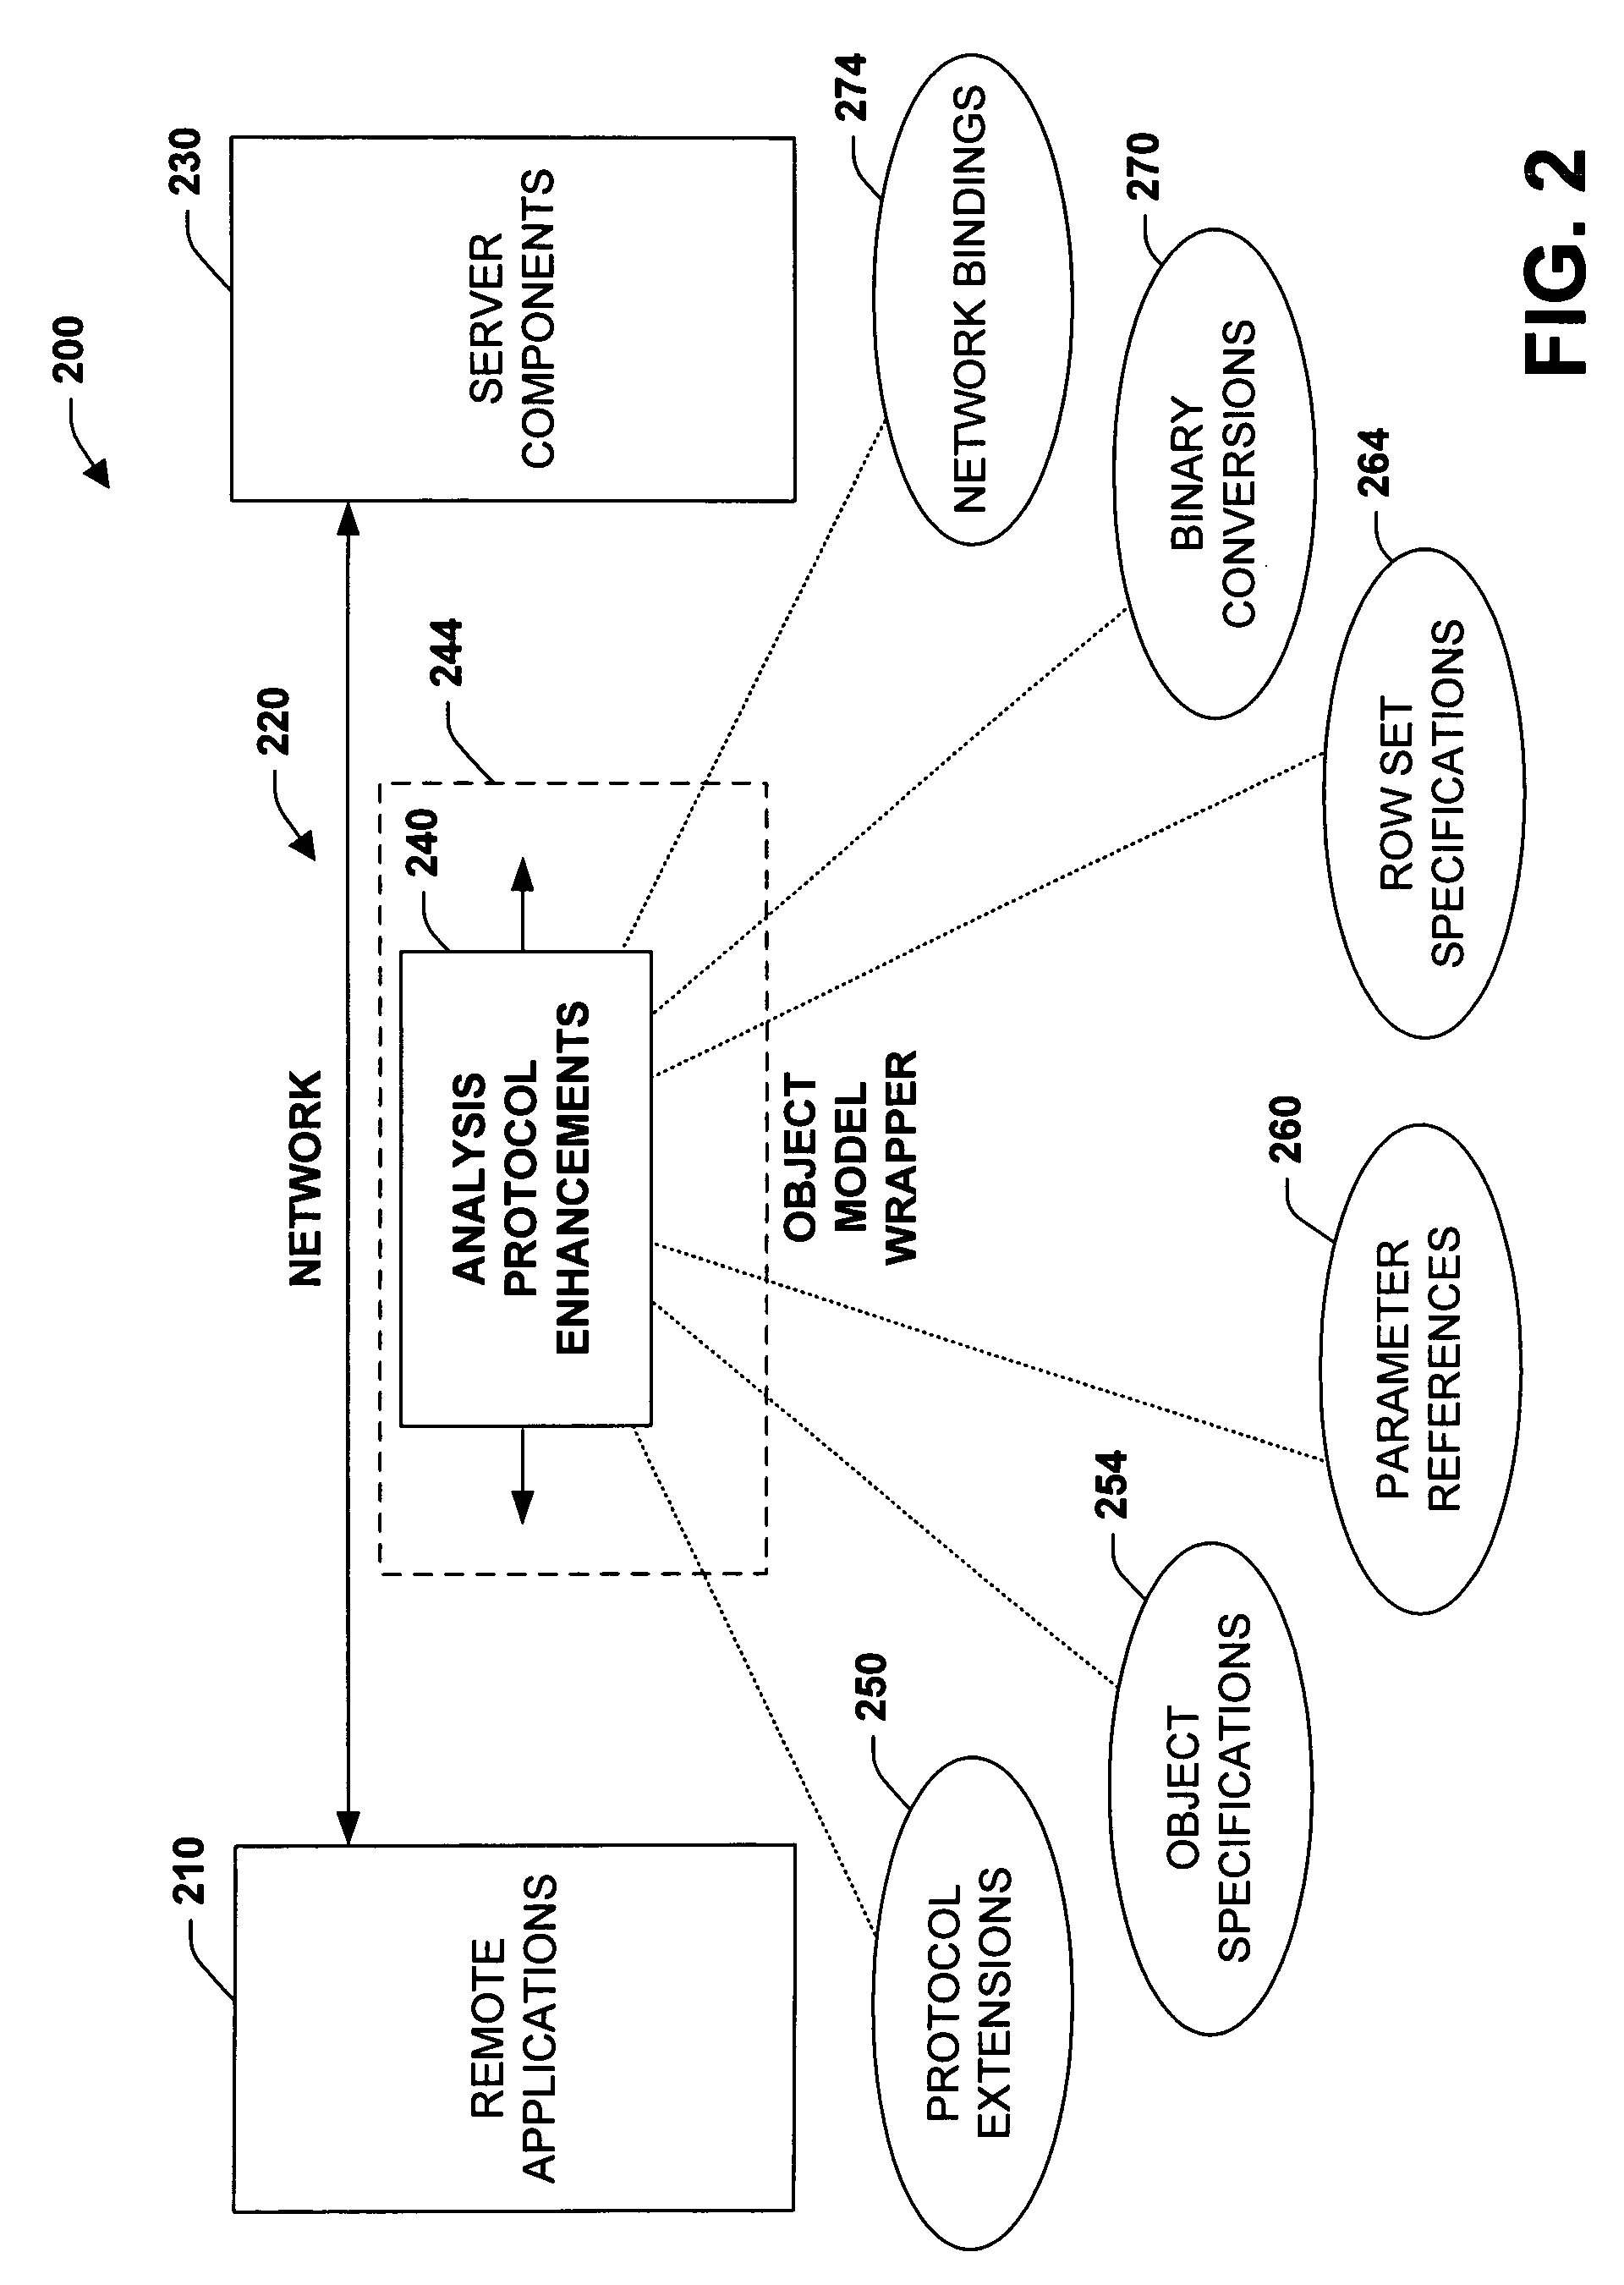 Systems and methods to facilitate utilization of database modeling